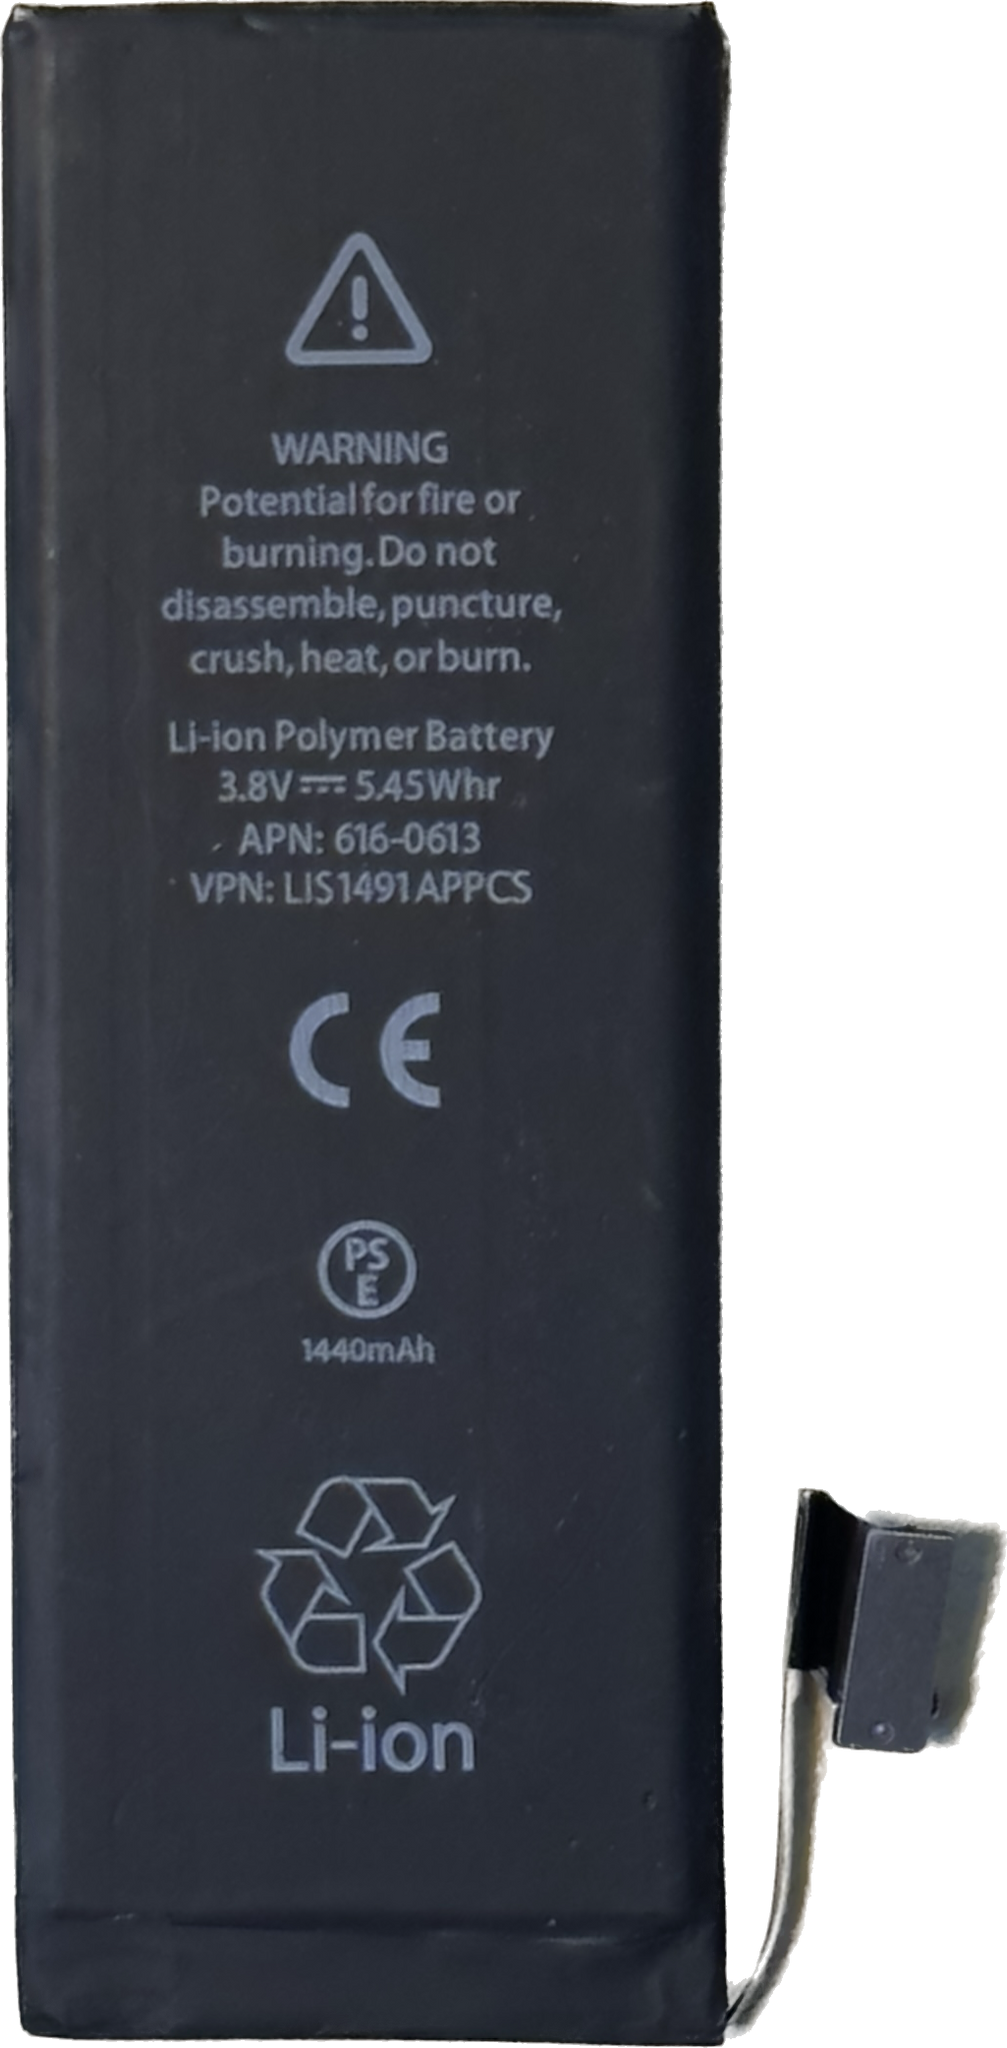 New 1440mah Lithium-Ion Polymer Battery for Apple iPhone 5 A1428 A1429 A1442